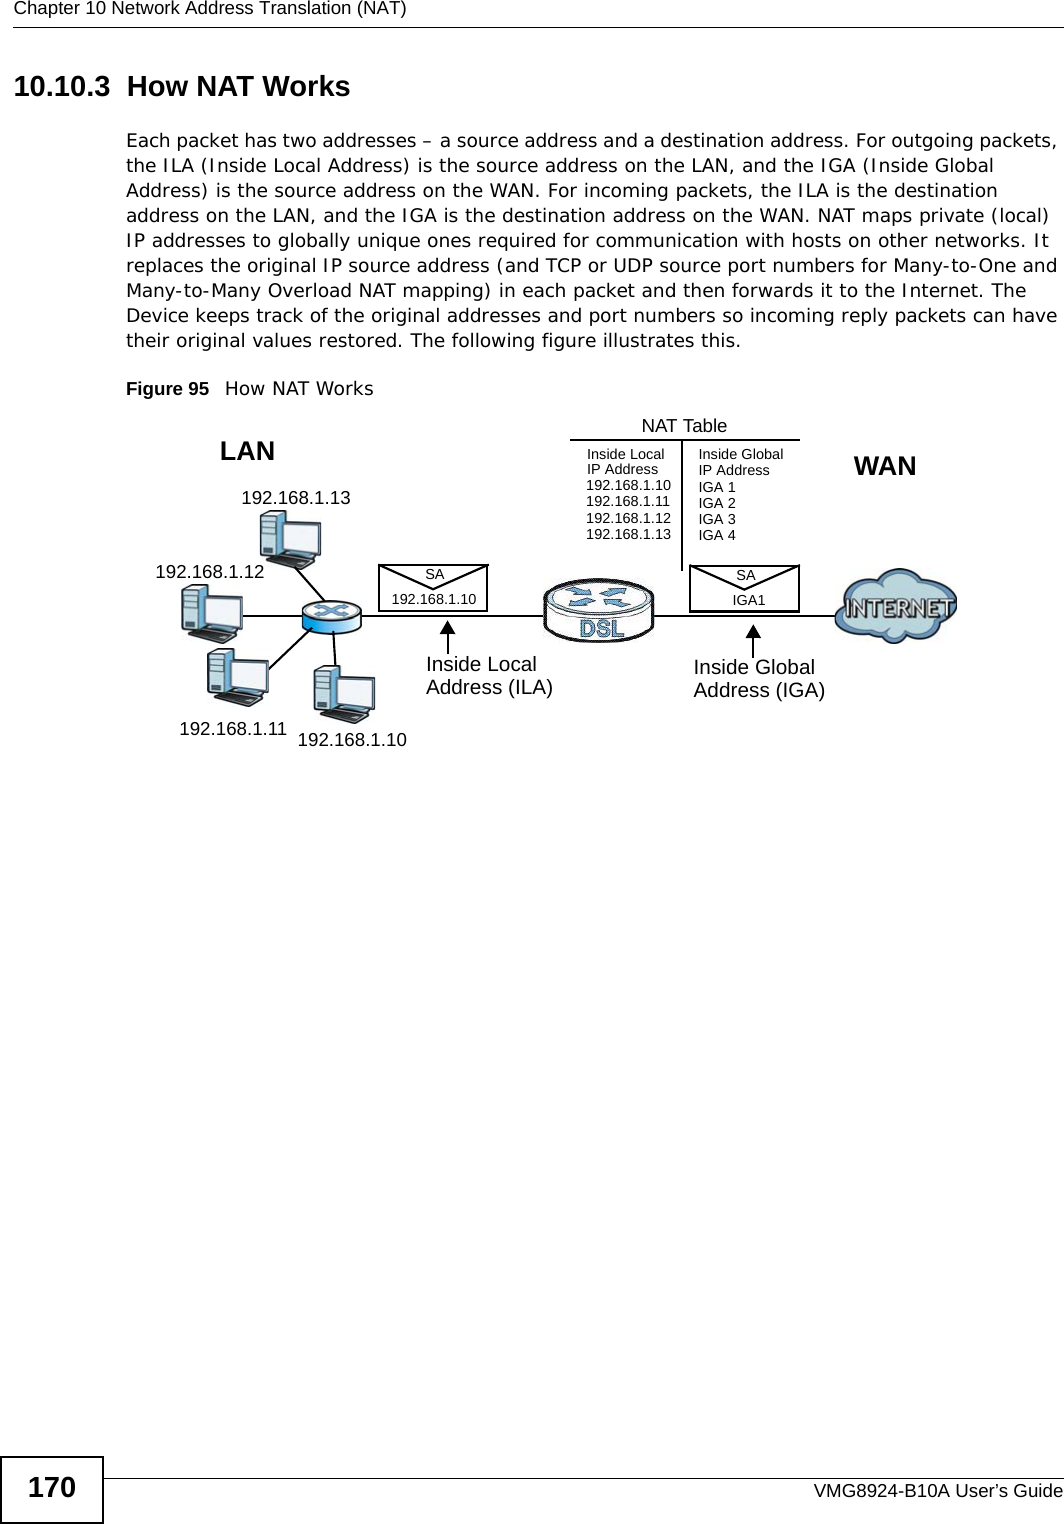 Chapter 10 Network Address Translation (NAT)VMG8924-B10A User’s Guide17010.10.3  How NAT WorksEach packet has two addresses – a source address and a destination address. For outgoing packets, the ILA (Inside Local Address) is the source address on the LAN, and the IGA (Inside Global Address) is the source address on the WAN. For incoming packets, the ILA is the destination address on the LAN, and the IGA is the destination address on the WAN. NAT maps private (local) IP addresses to globally unique ones required for communication with hosts on other networks. It replaces the original IP source address (and TCP or UDP source port numbers for Many-to-One and Many-to-Many Overload NAT mapping) in each packet and then forwards it to the Internet. The Device keeps track of the original addresses and port numbers so incoming reply packets can have their original values restored. The following figure illustrates this.Figure 95   How NAT Works192.168.1.13192.168.1.10192.168.1.11192.168.1.12 SA192.168.1.10SAIGA1Inside LocalIP Address192.168.1.10192.168.1.11192.168.1.12192.168.1.13Inside Global IP AddressIGA 1IGA 2IGA 3IGA 4NAT TableWANLANInside LocalAddress (ILA) Inside GlobalAddress (IGA)